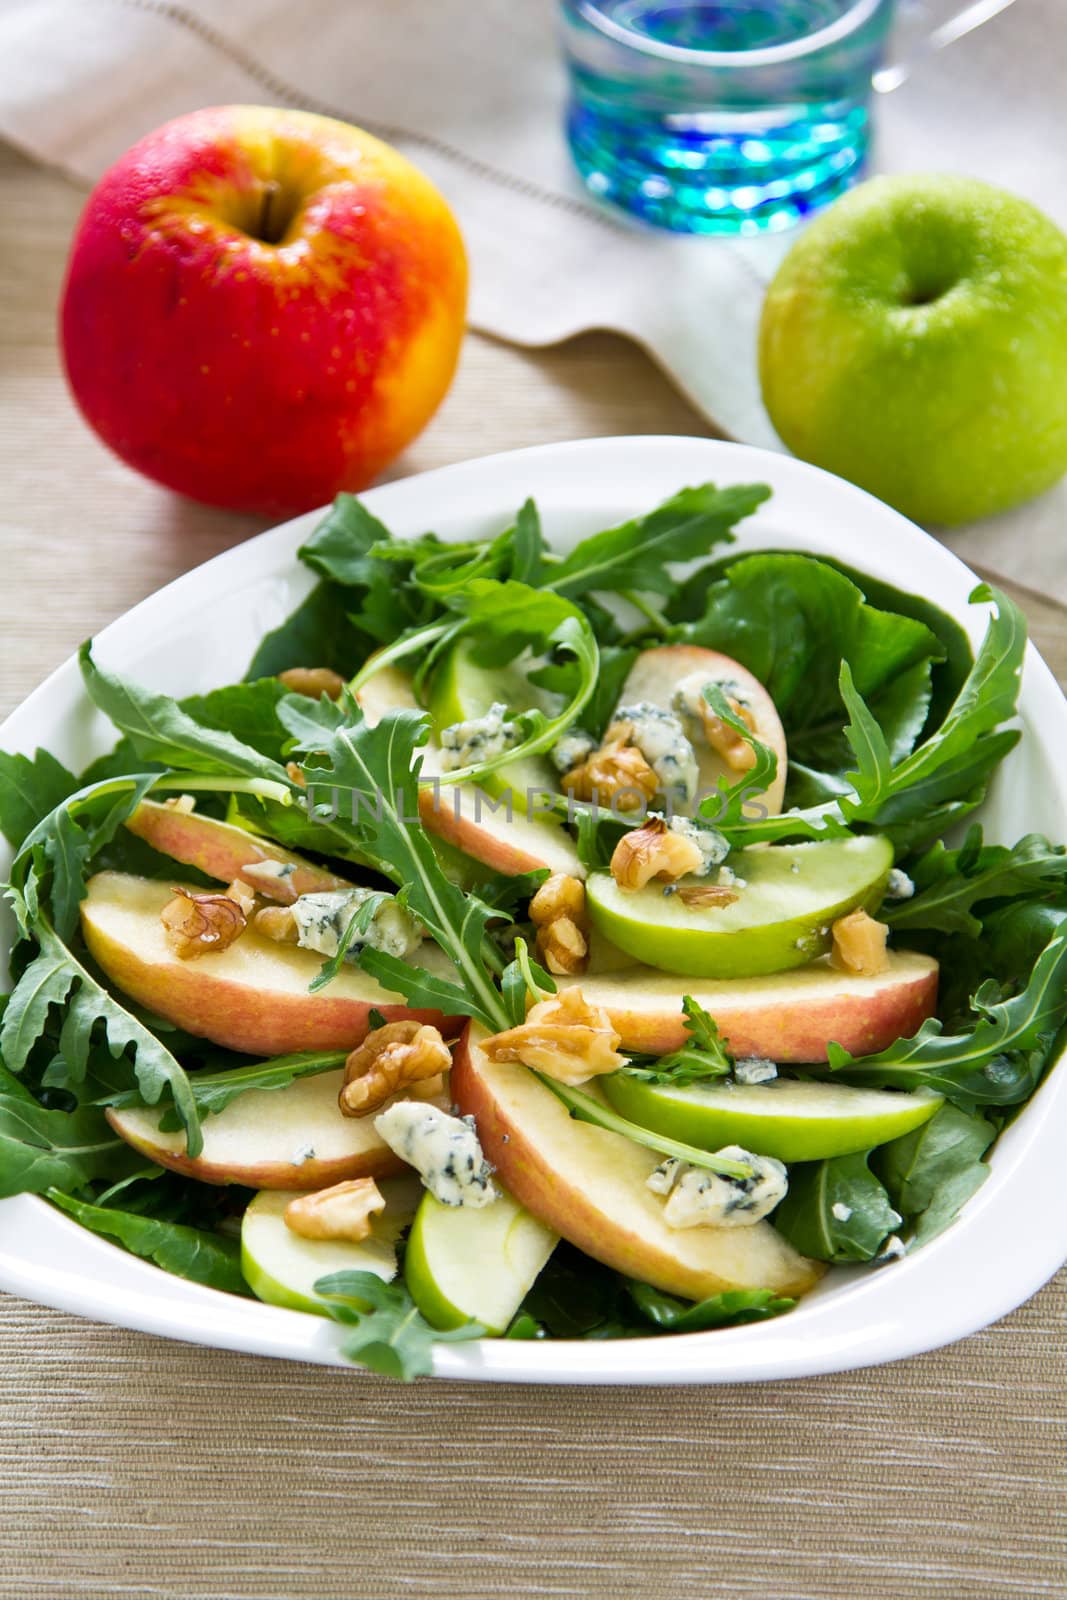 Apple ,Walnut with Blue cheese and rocket salad